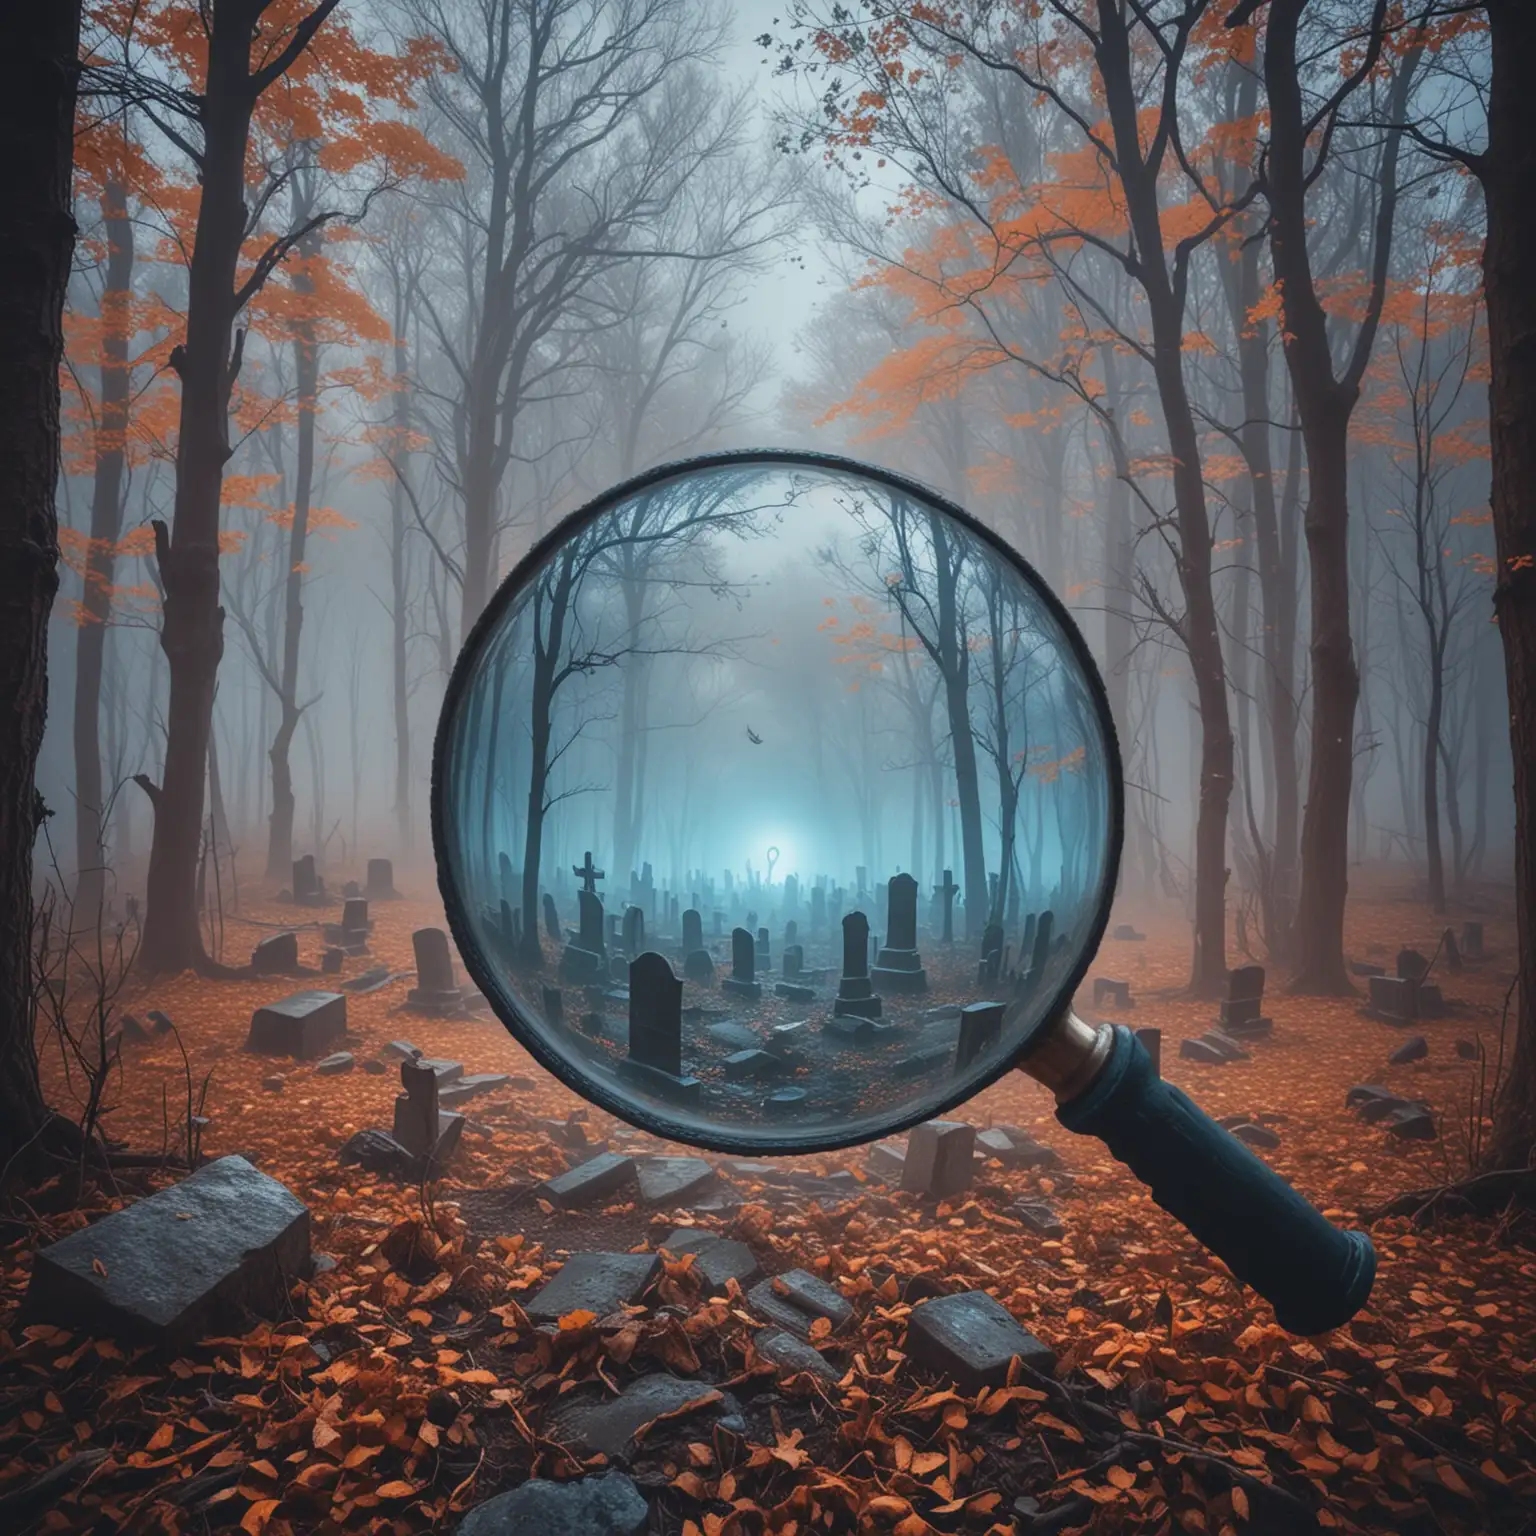 creepy graveyard in a forest with blue and orange mist at night sent though a magnifying glass


